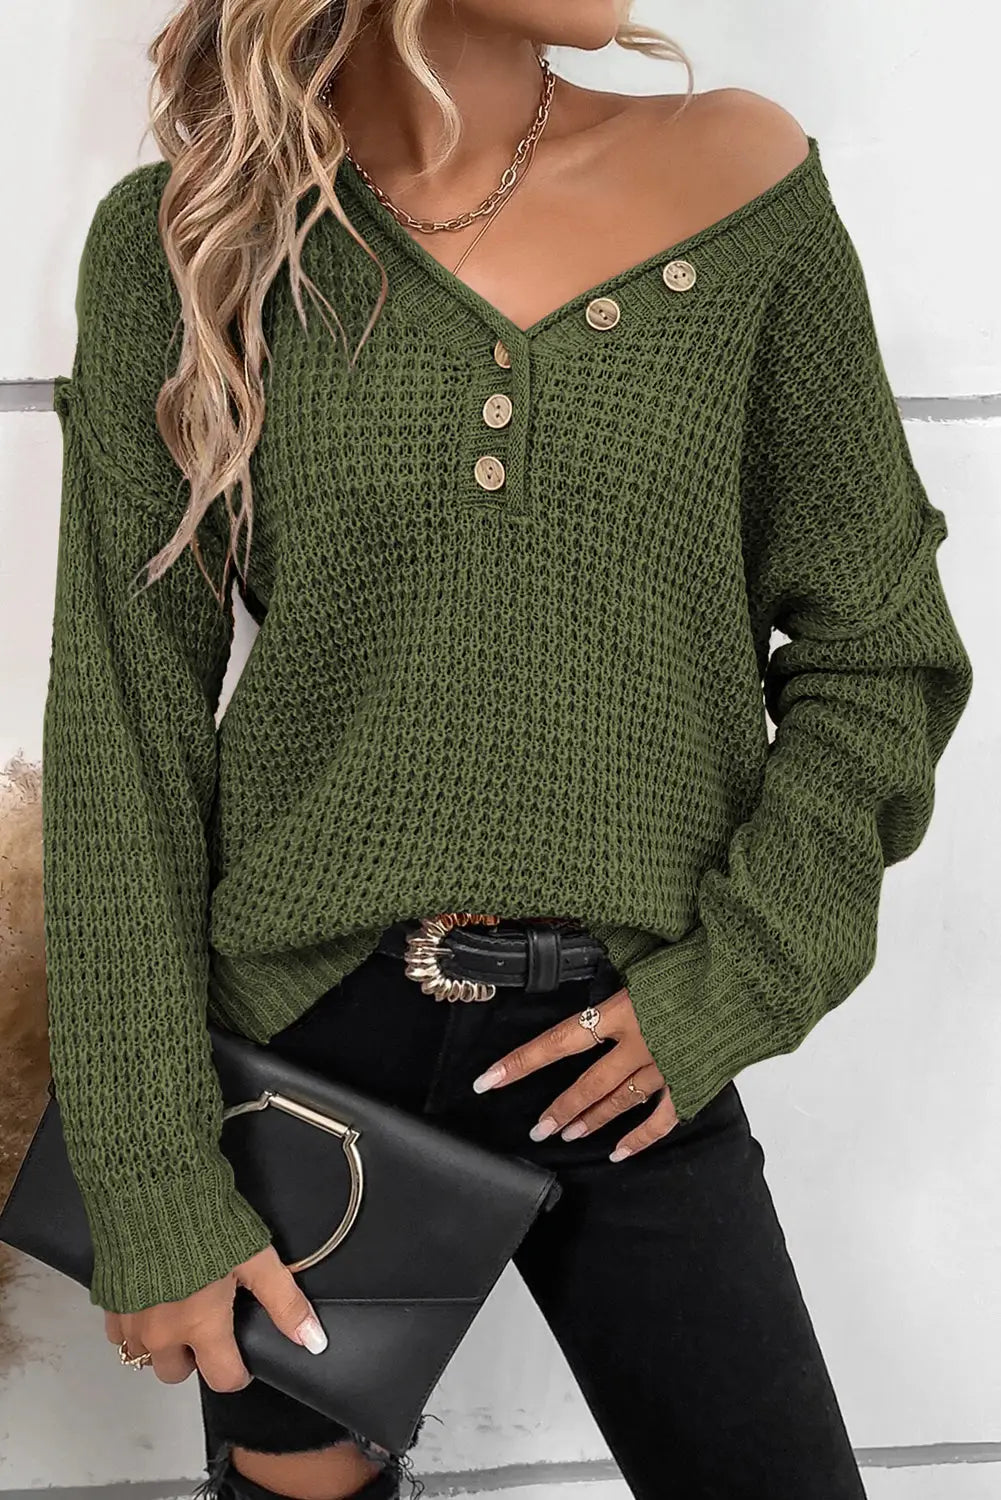 Rose red pointelle knit button v neck drop shoulder sweater - pickle green / s / 55% acrylic + 45% cotton - sweaters &